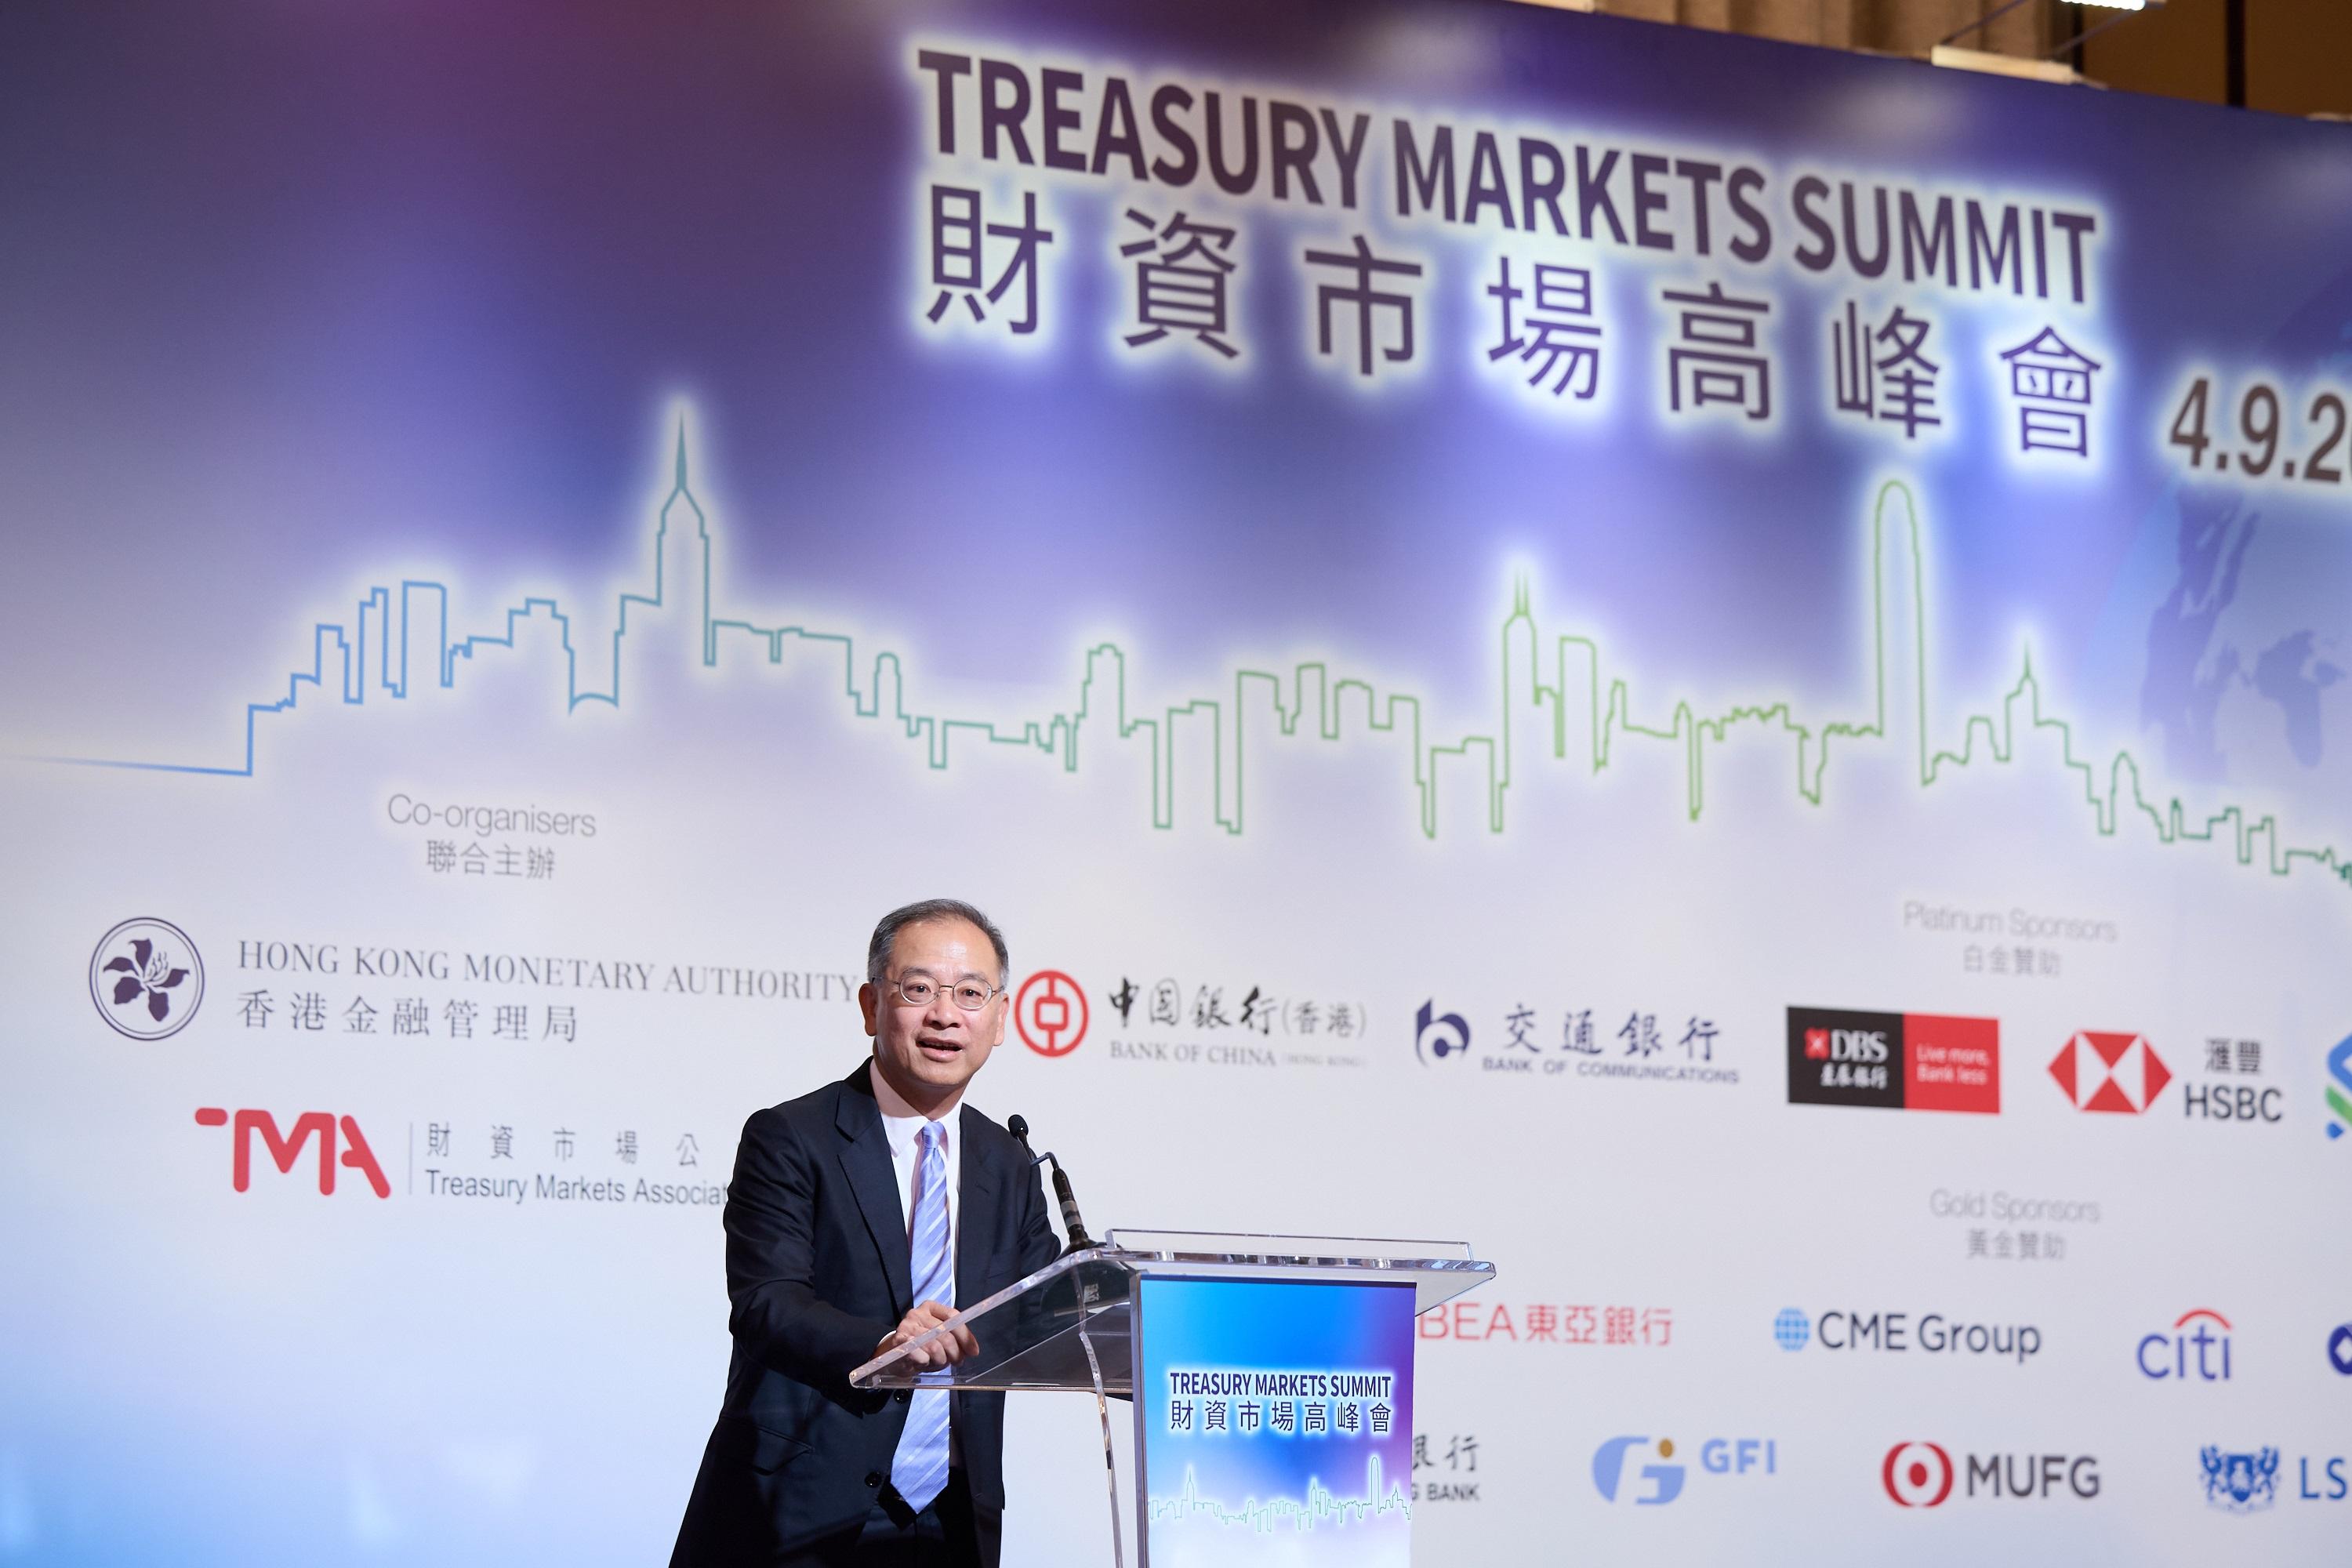 The Chief Executive of the Hong Kong Monetary Authority and the Honorary President of the Treasury Markets Association Council, Mr Eddie Yue, gives the welcoming remarks and keynote speech at the Treasury Markets Summit 2023 held in Hong Kong today (September 4).